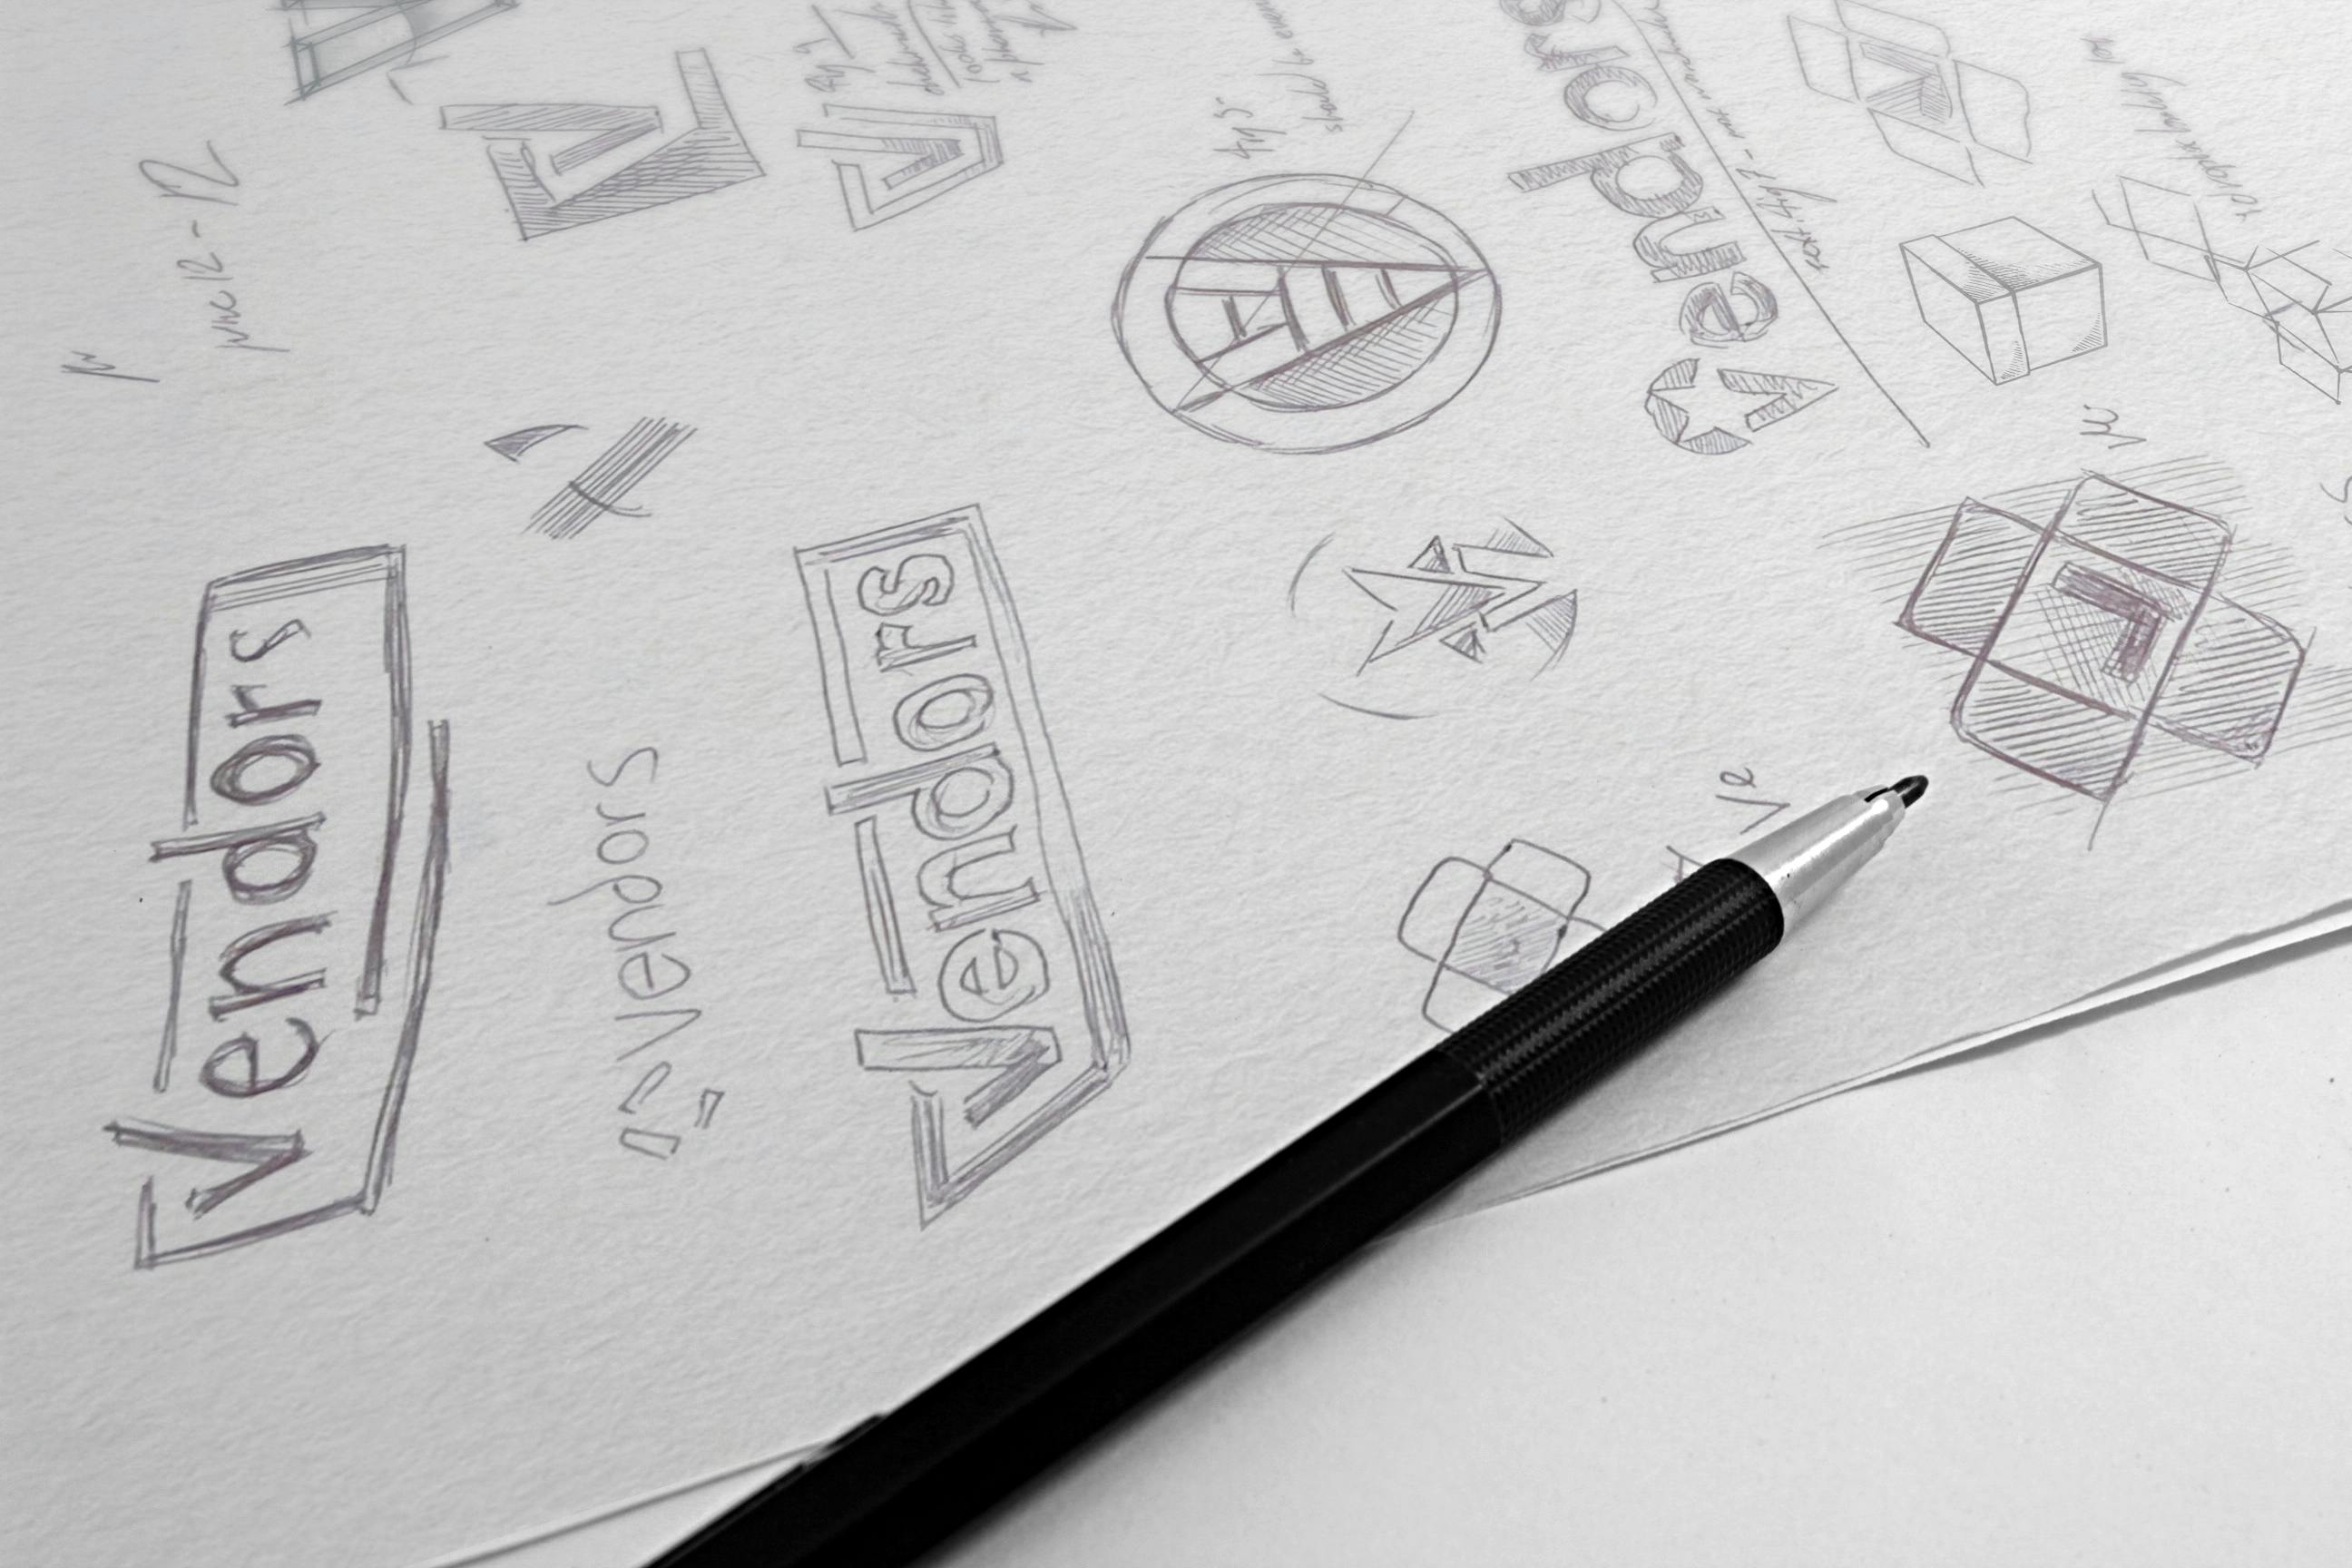 Page with pencil drawn logos all based on the Vendors' word mark and the letter V.